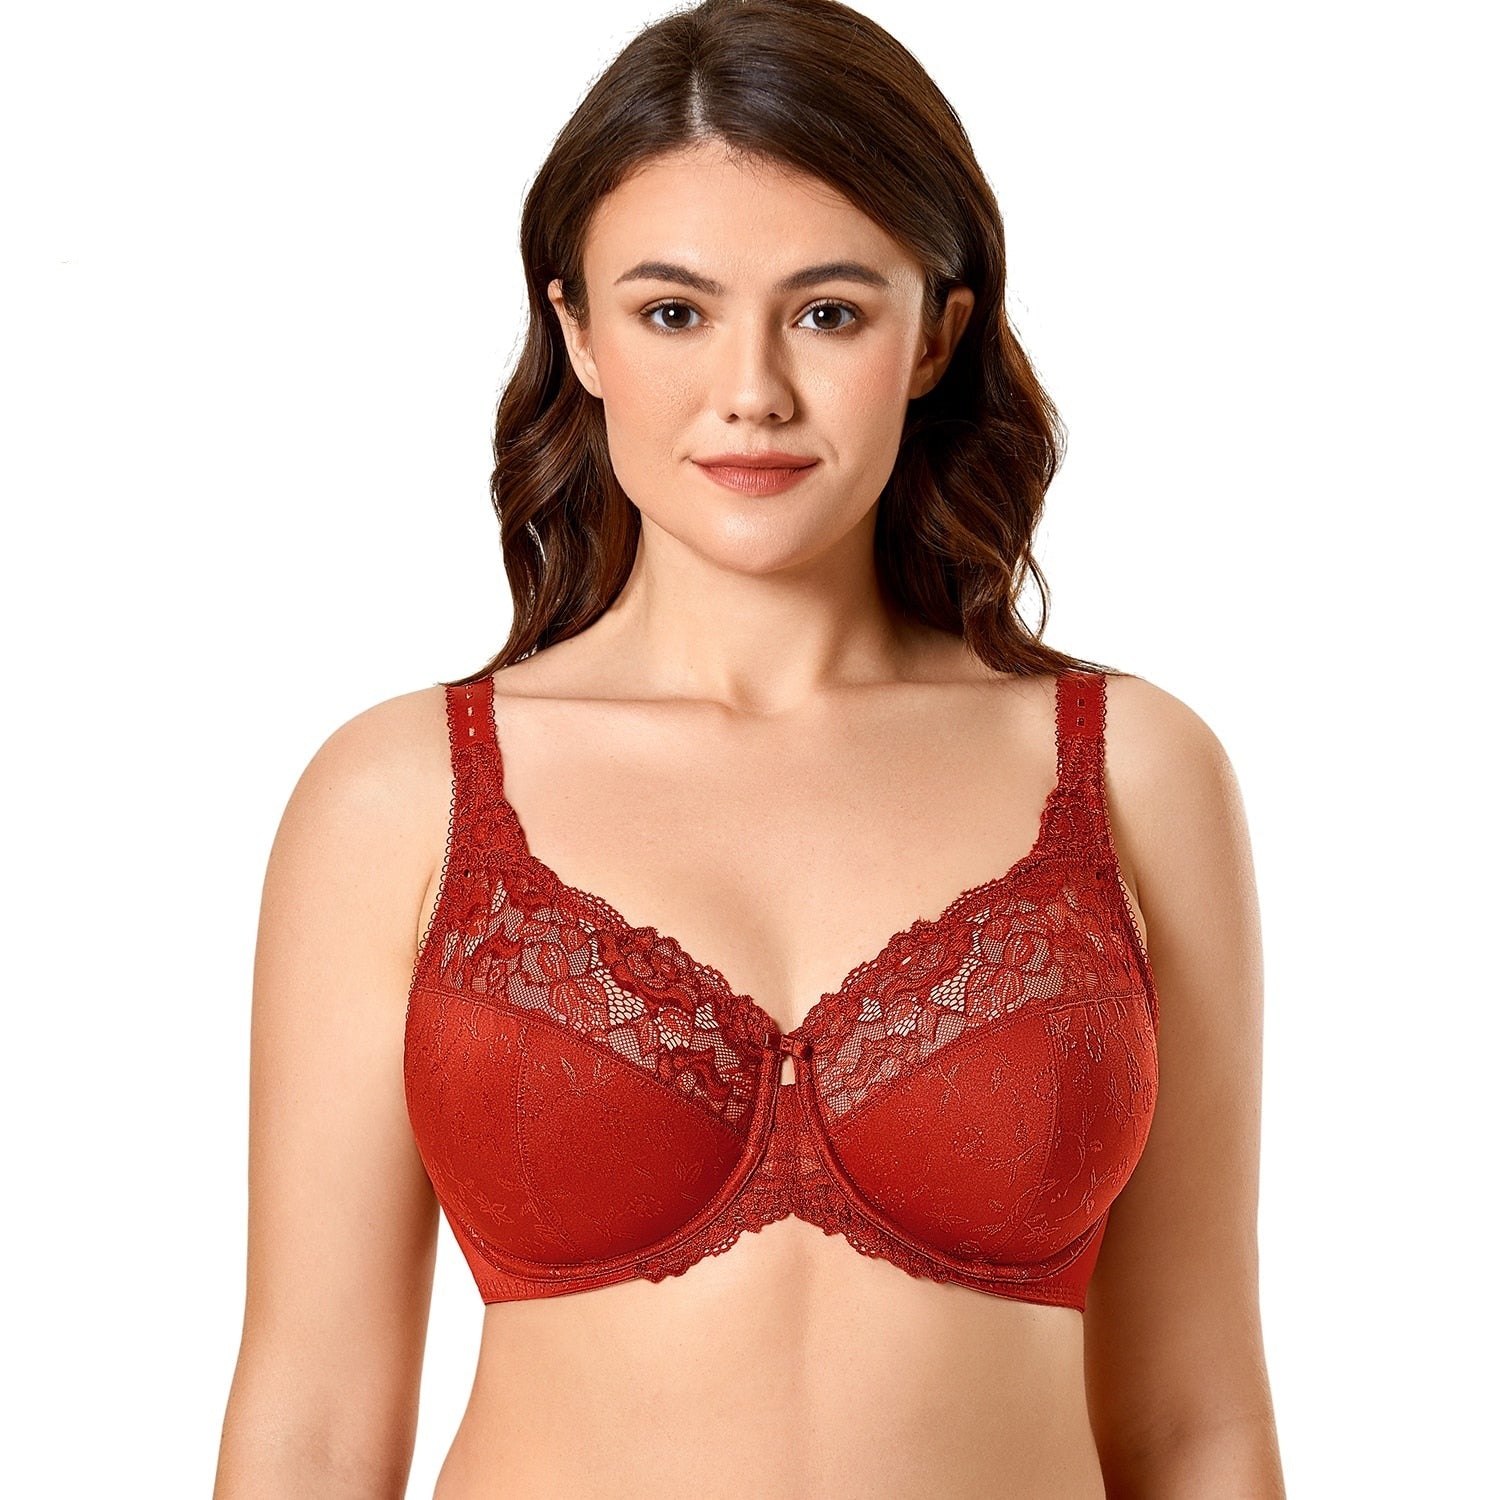 Buy Bra Size 36 Cup Online Shopping at